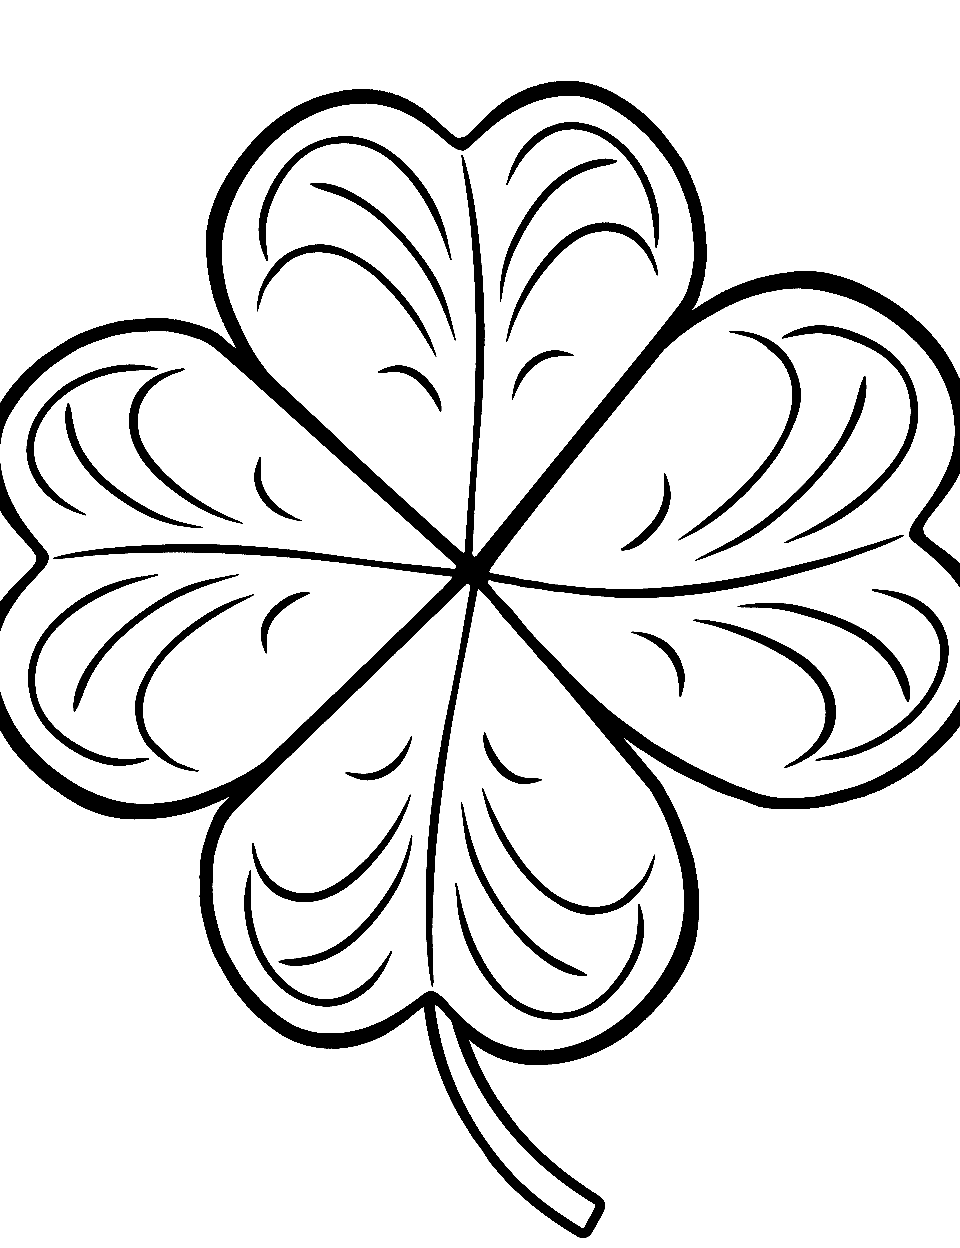 Detailed Four-Leaf Clover Coloring Page - An up-close view of a detailed four-leaf clover with intricate patterns.